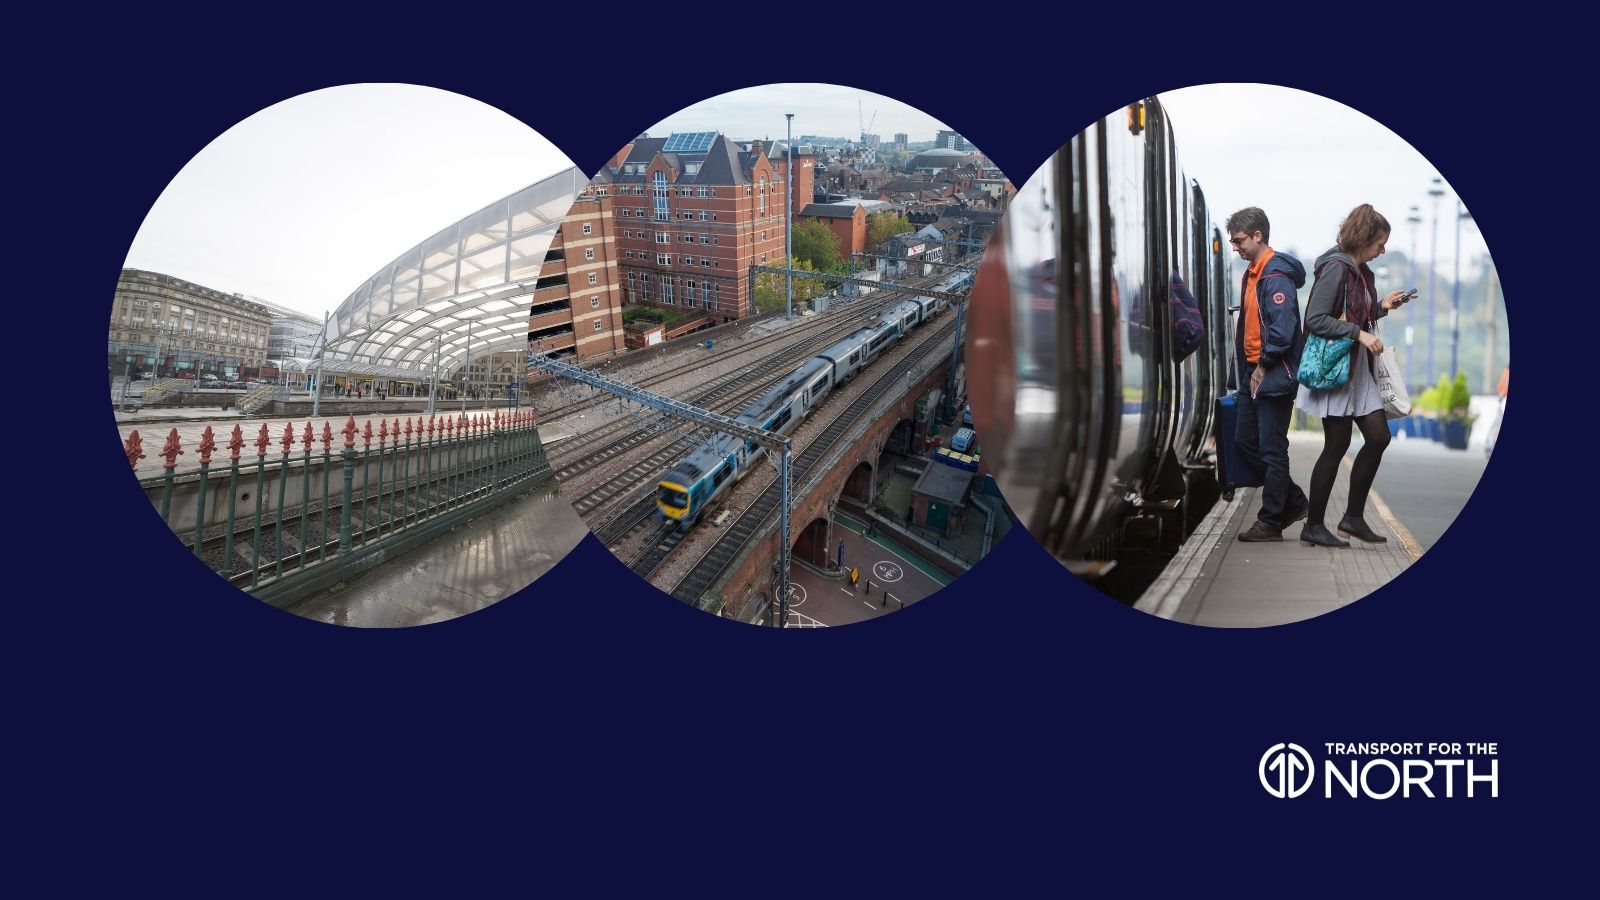 Investment of £317 million into the set-piece Transpennine route upgrade will boost punctuality, reliability and connectivity for passengers between York, Leeds and Manchester